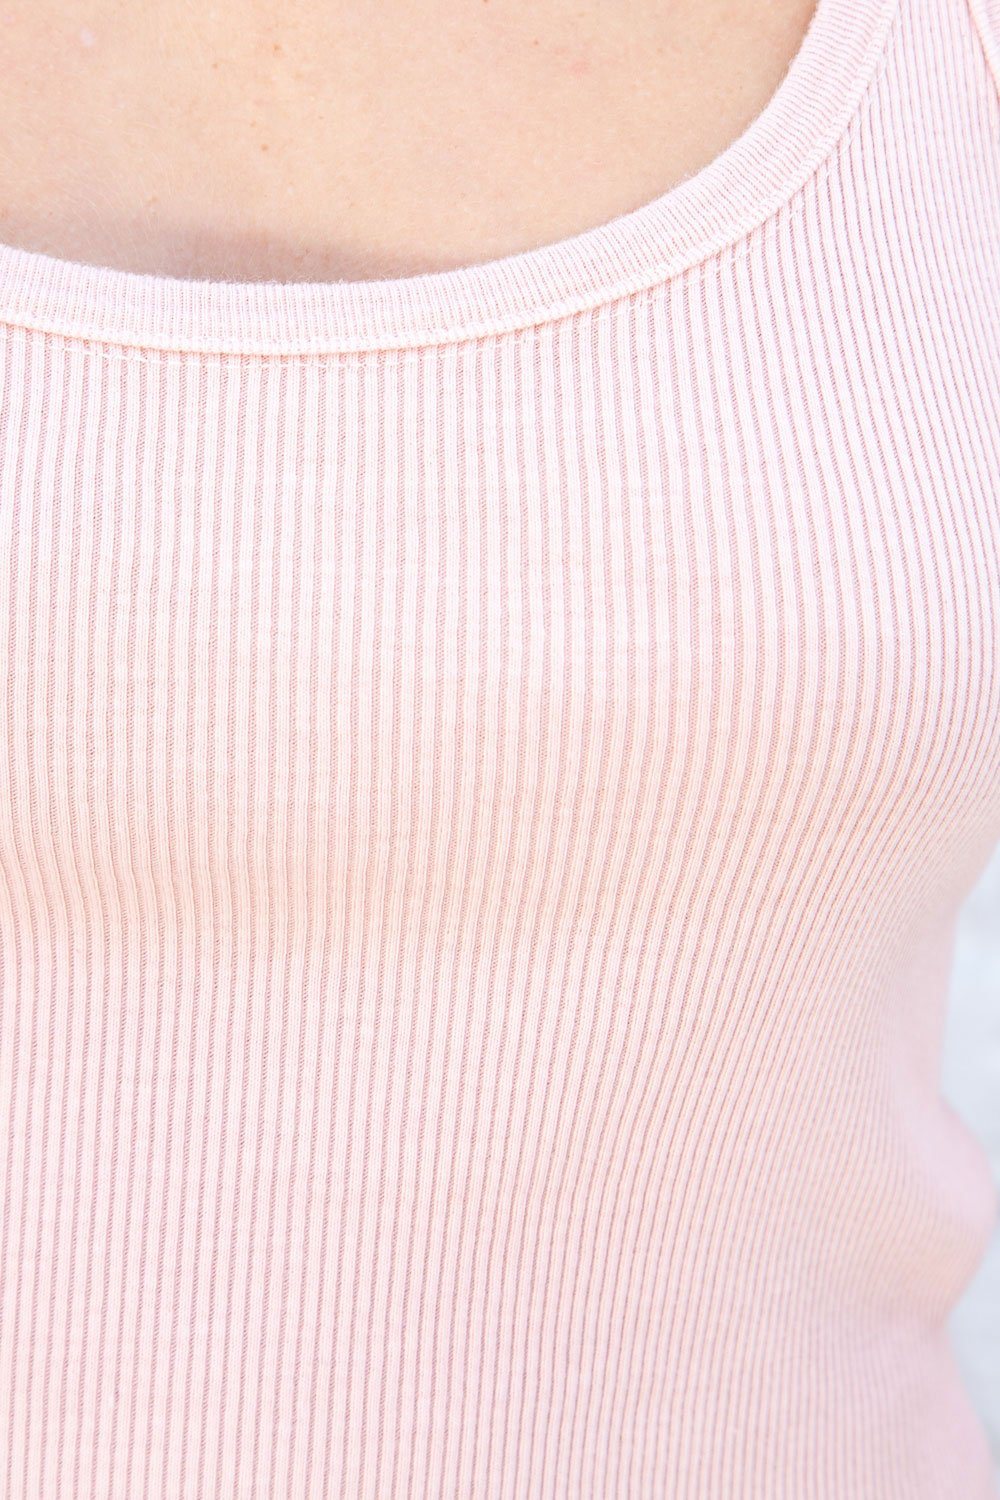 Rose Pink / Cropped Fit